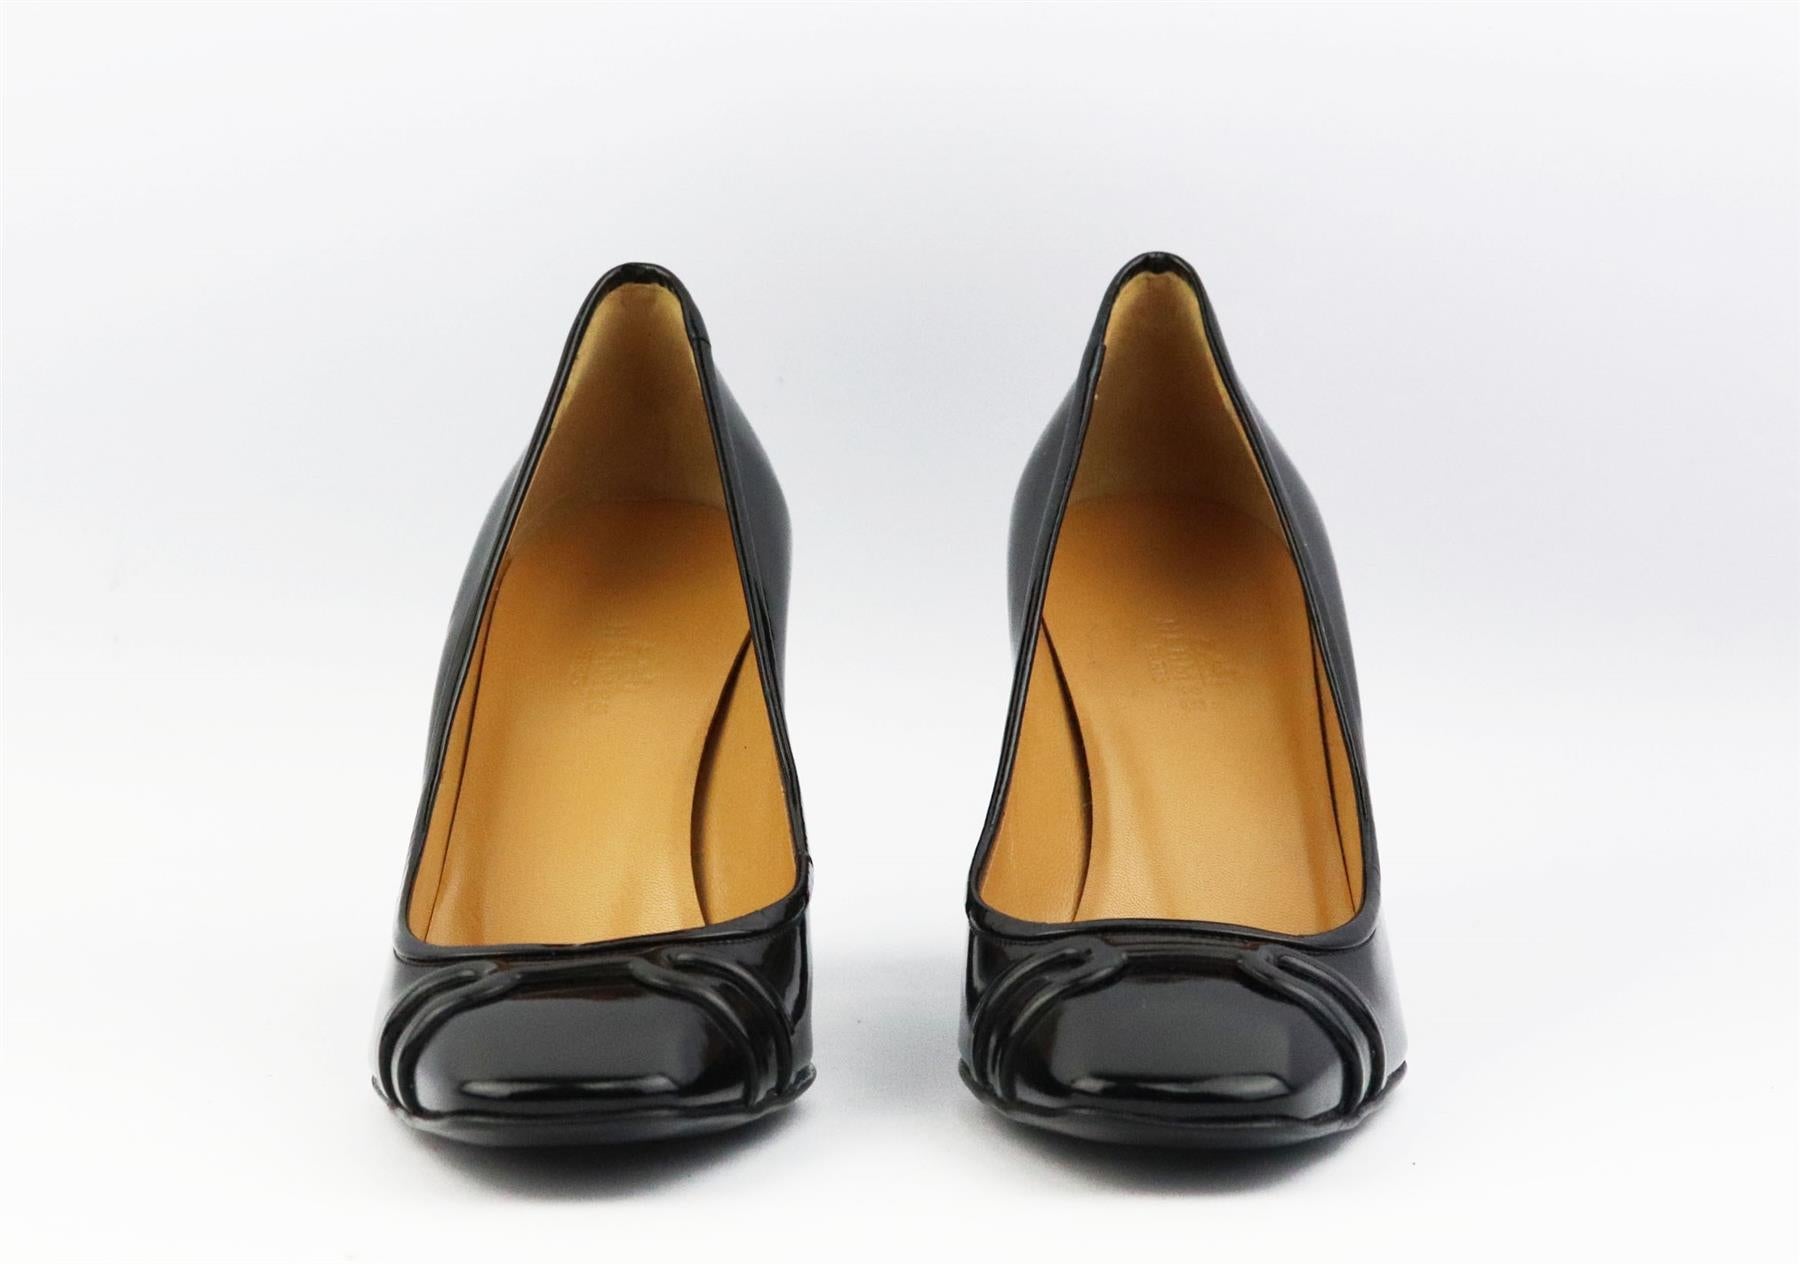 These pumps by Hermès are a classic style that will never date, made in Italy from supple black patent-leather, they have a square toe and embossed buckle detail to take you from morning meetings to dinner with friends. Heel measures approximately